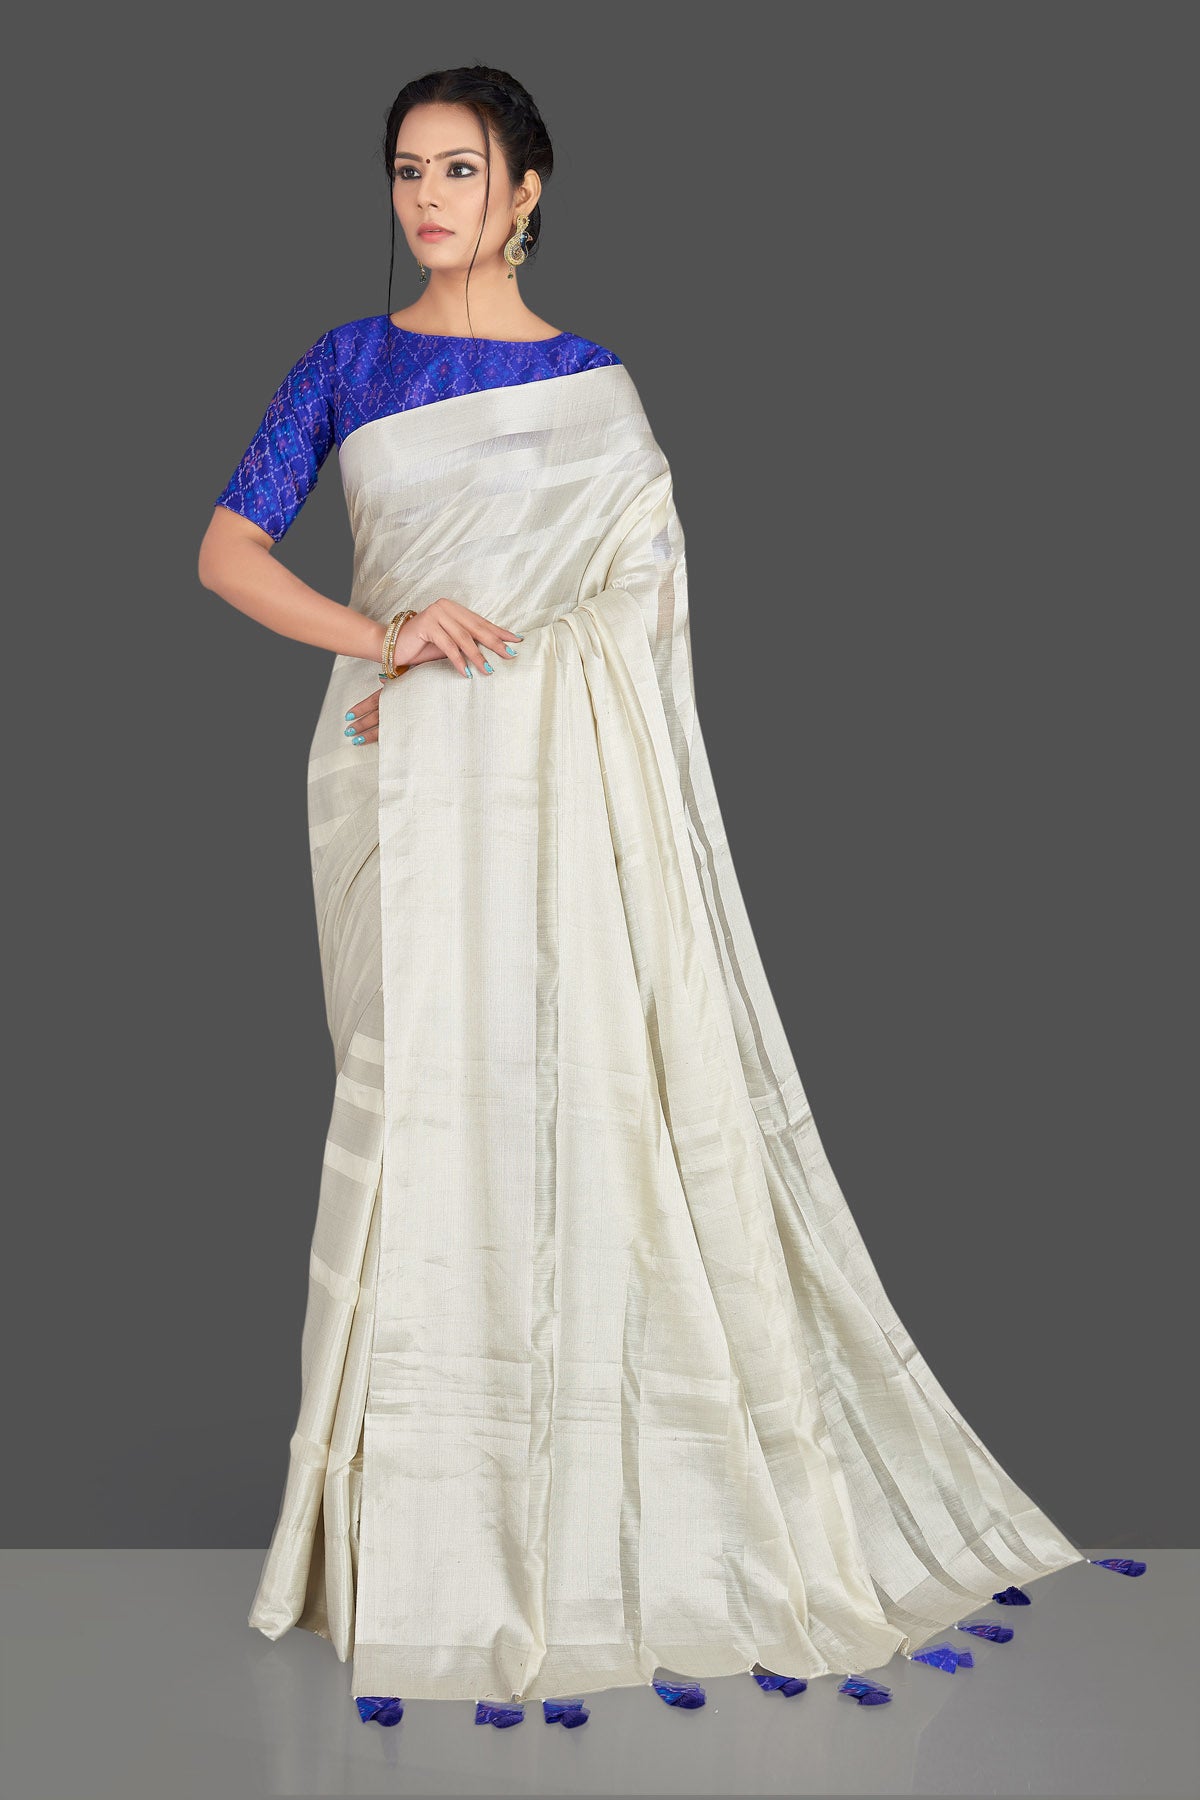 Buy lovely off-white tassar silk sari online in USA with blue patola ikkat saree blouse. Make your ethnic wardrobe rich with timeless handwoven sarees, tissue sarees, silk sarees, tussar saris from Pure Elegance Indian clothing store in USA. Find all the designer sarees for special occasions under one roof!-full view